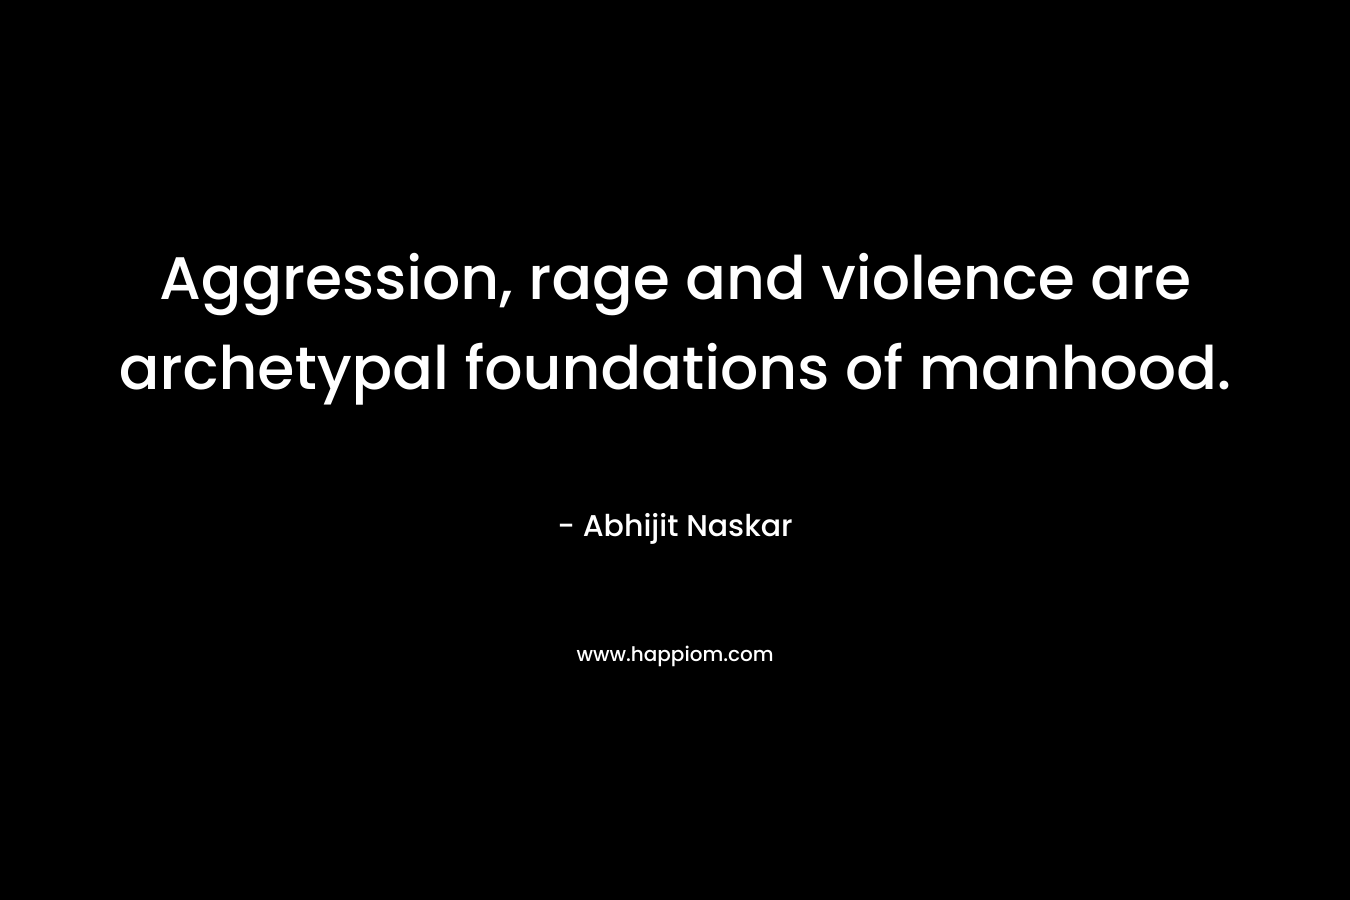 Aggression, rage and violence are archetypal foundations of manhood. – Abhijit Naskar